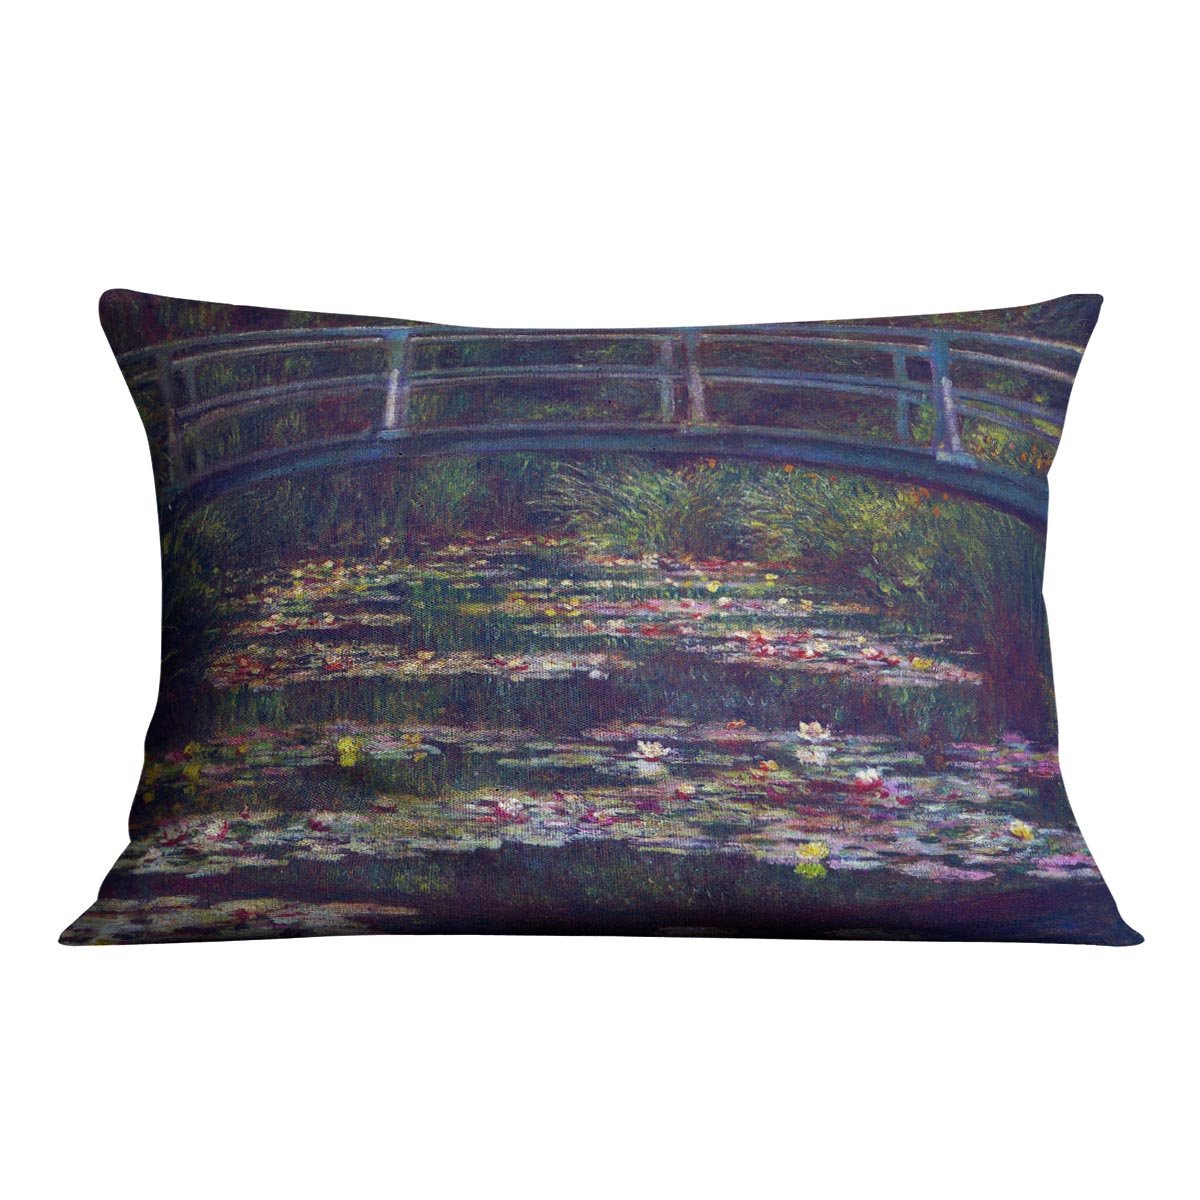 Water Lily Pond 5 by Monet Throw Pillow